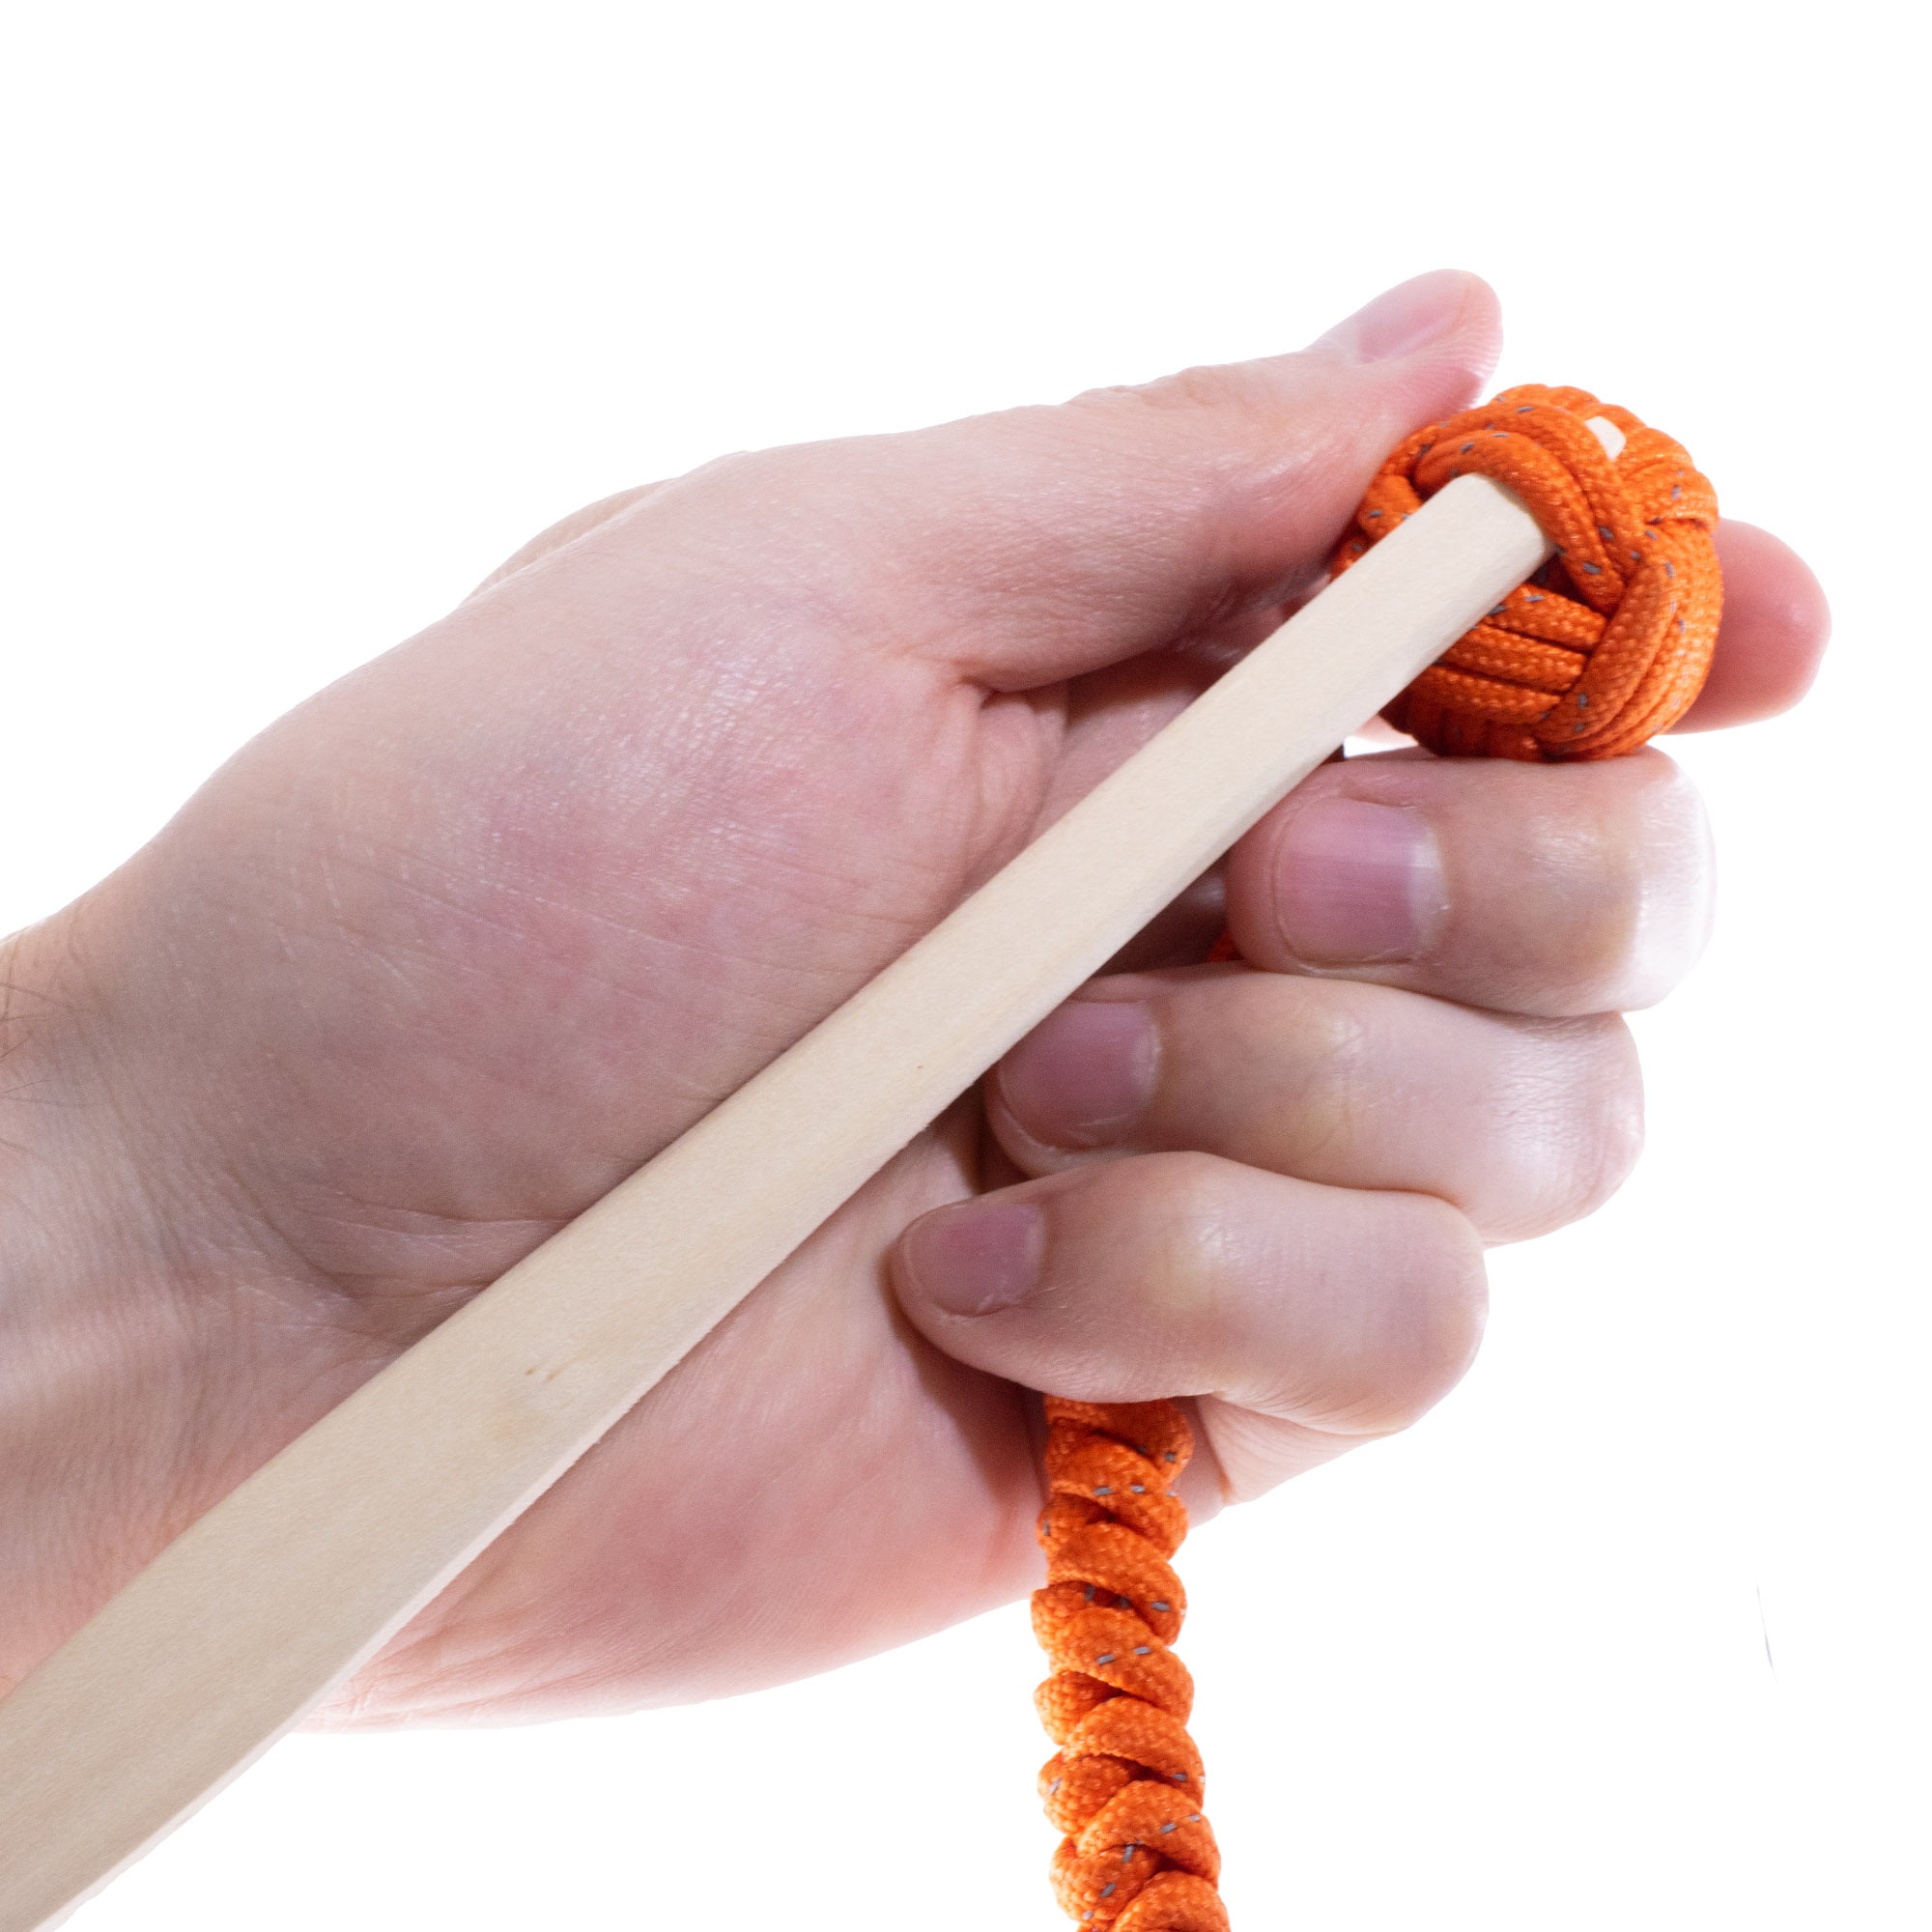 Craft County Wooden Knot Tying Tool - Easy Knotting for Paracord, Rope,  Yarn, Cords & More 